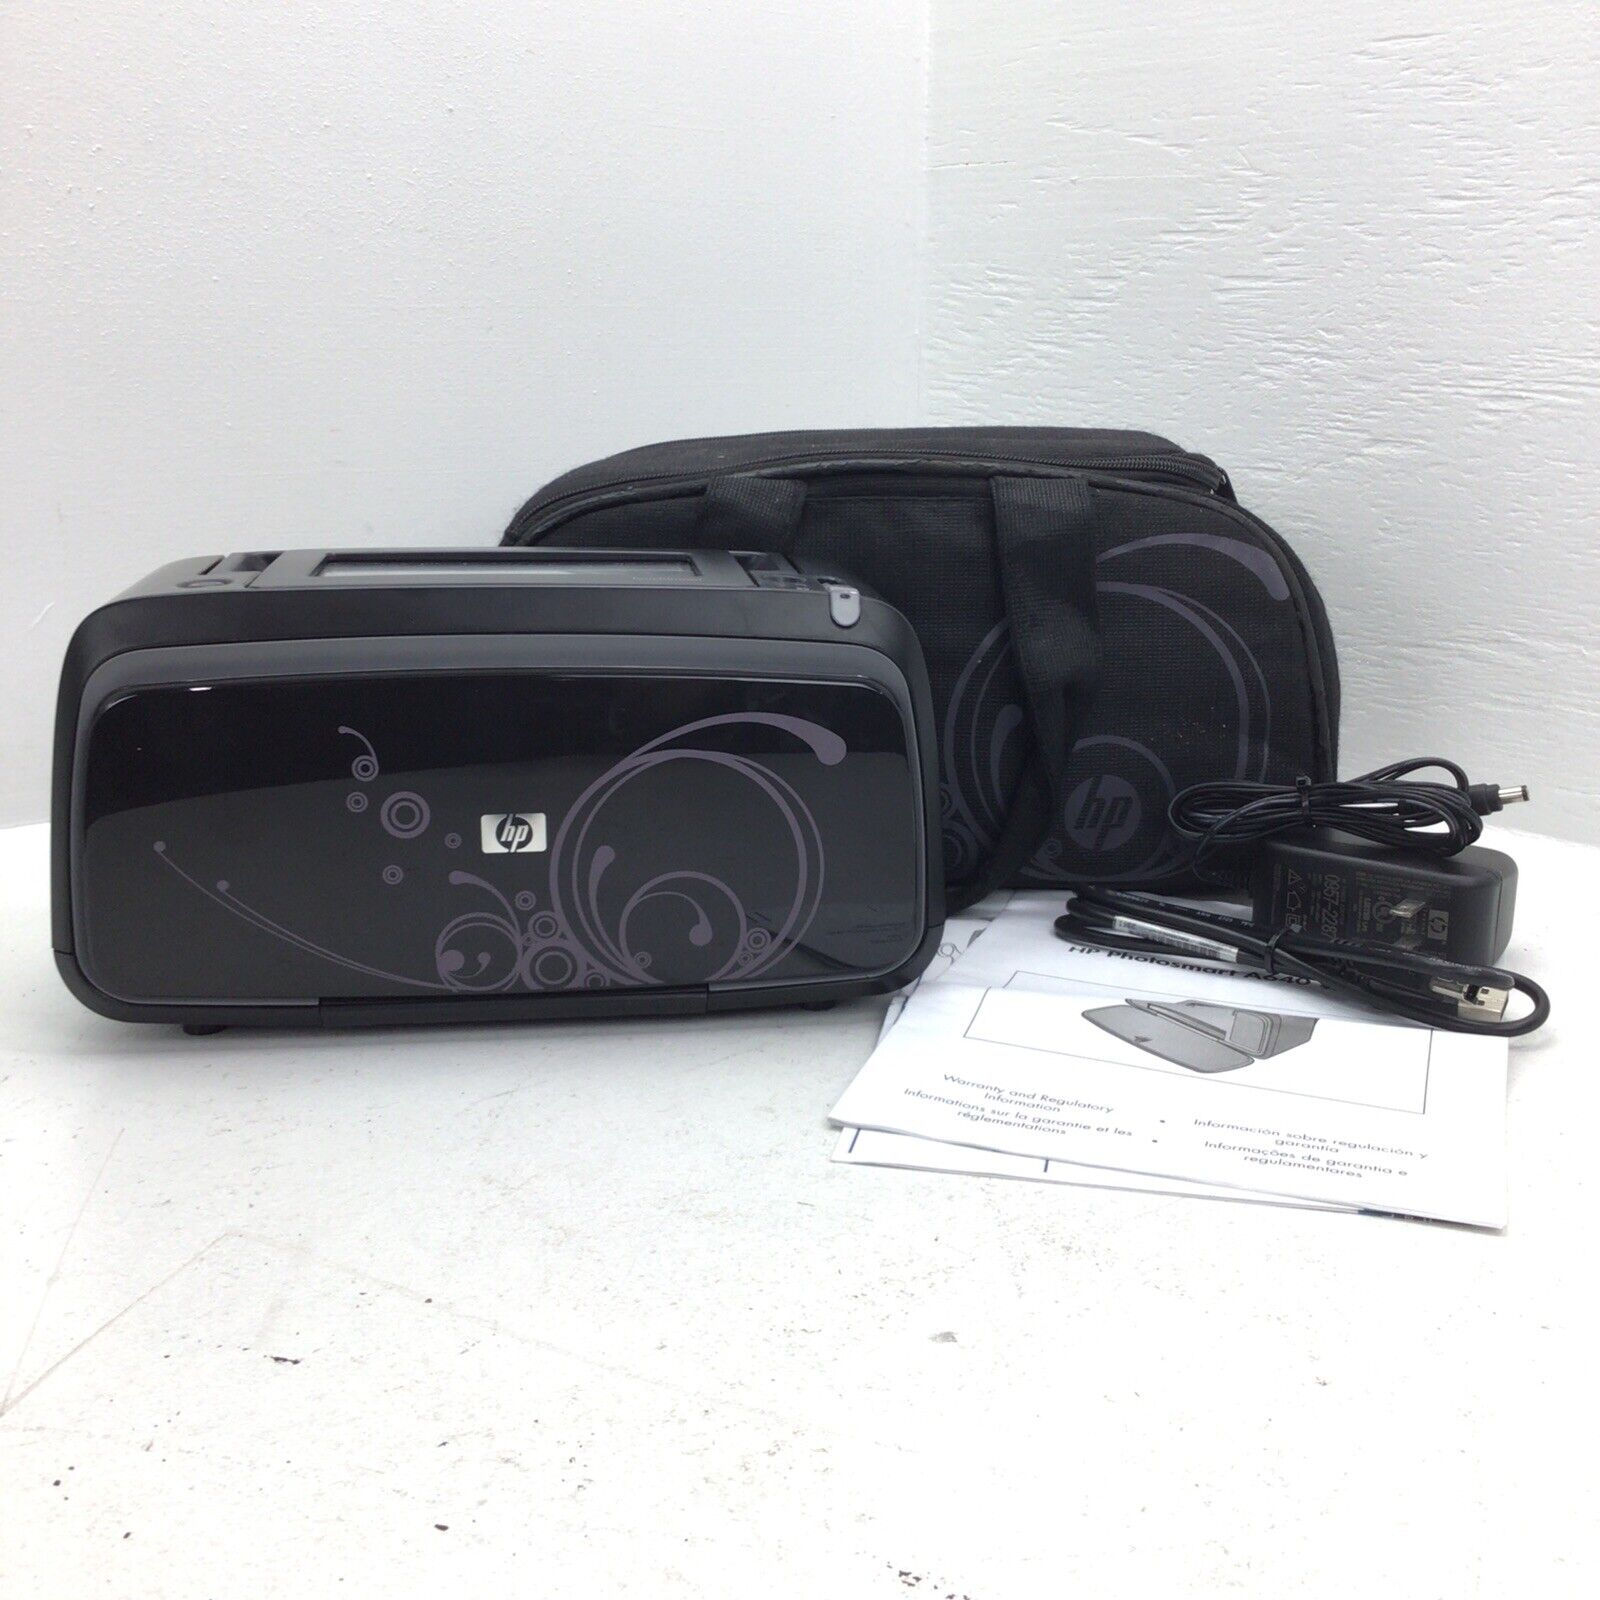 HP Photosmart Printer A646 Series with Carrying Case, Cords & Instructions